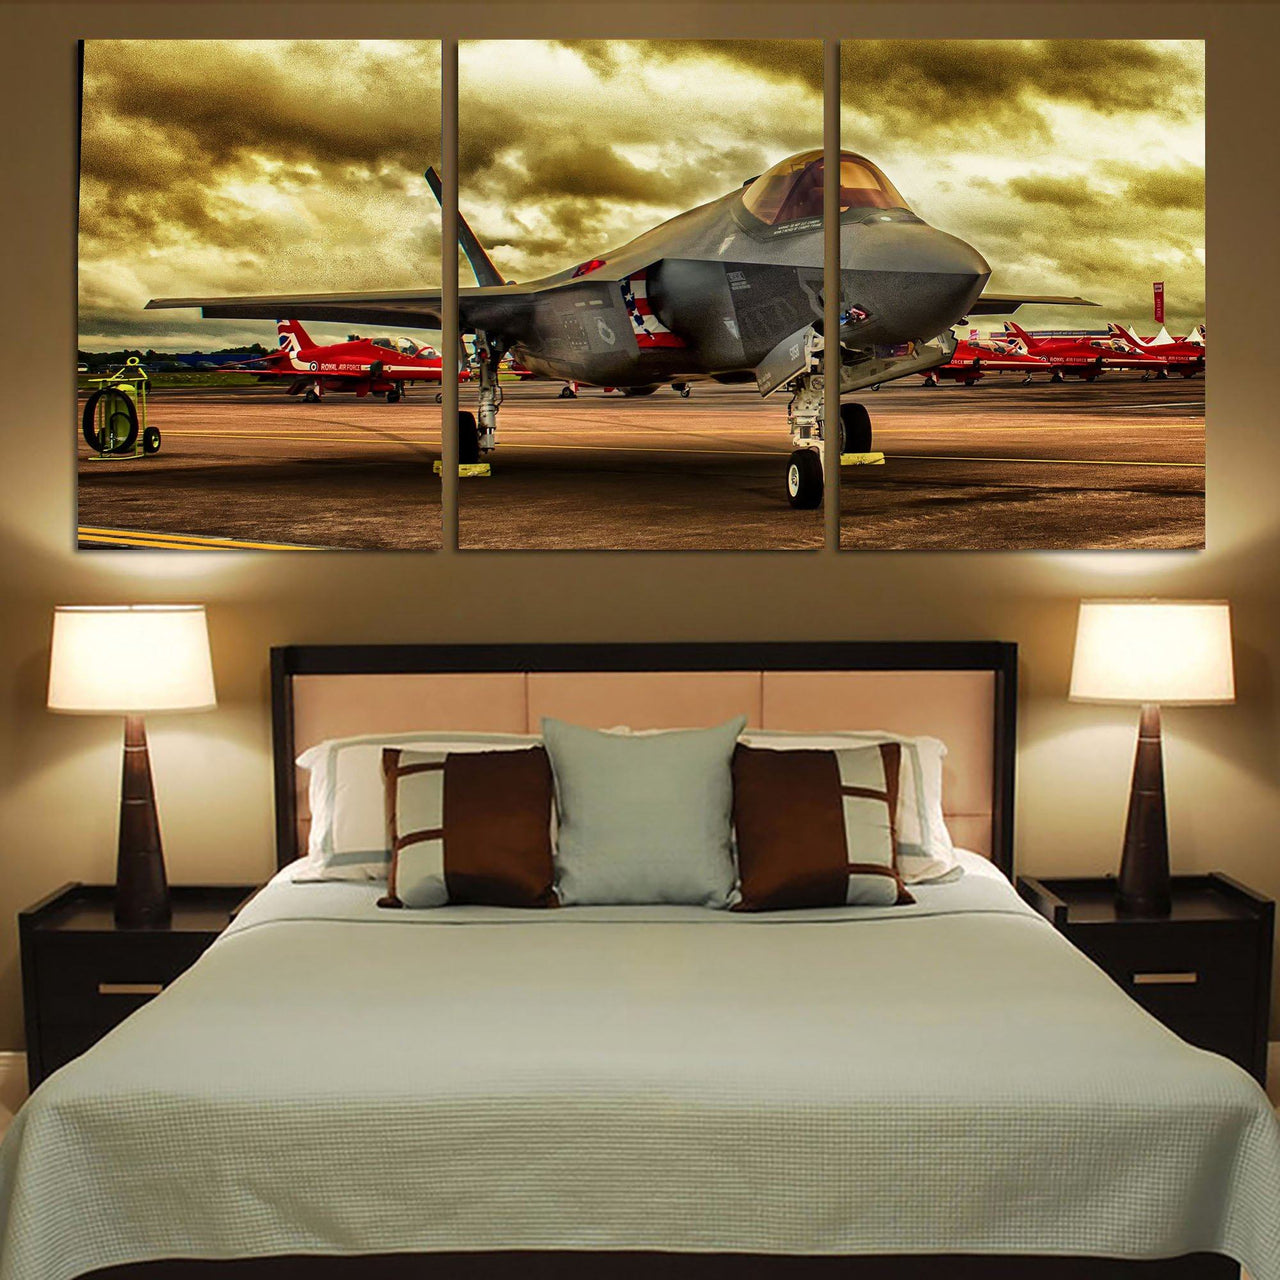 Fighting Falcon F35 at Airbase Printed Canvas Posters (3 Pieces) Aviation Shop 